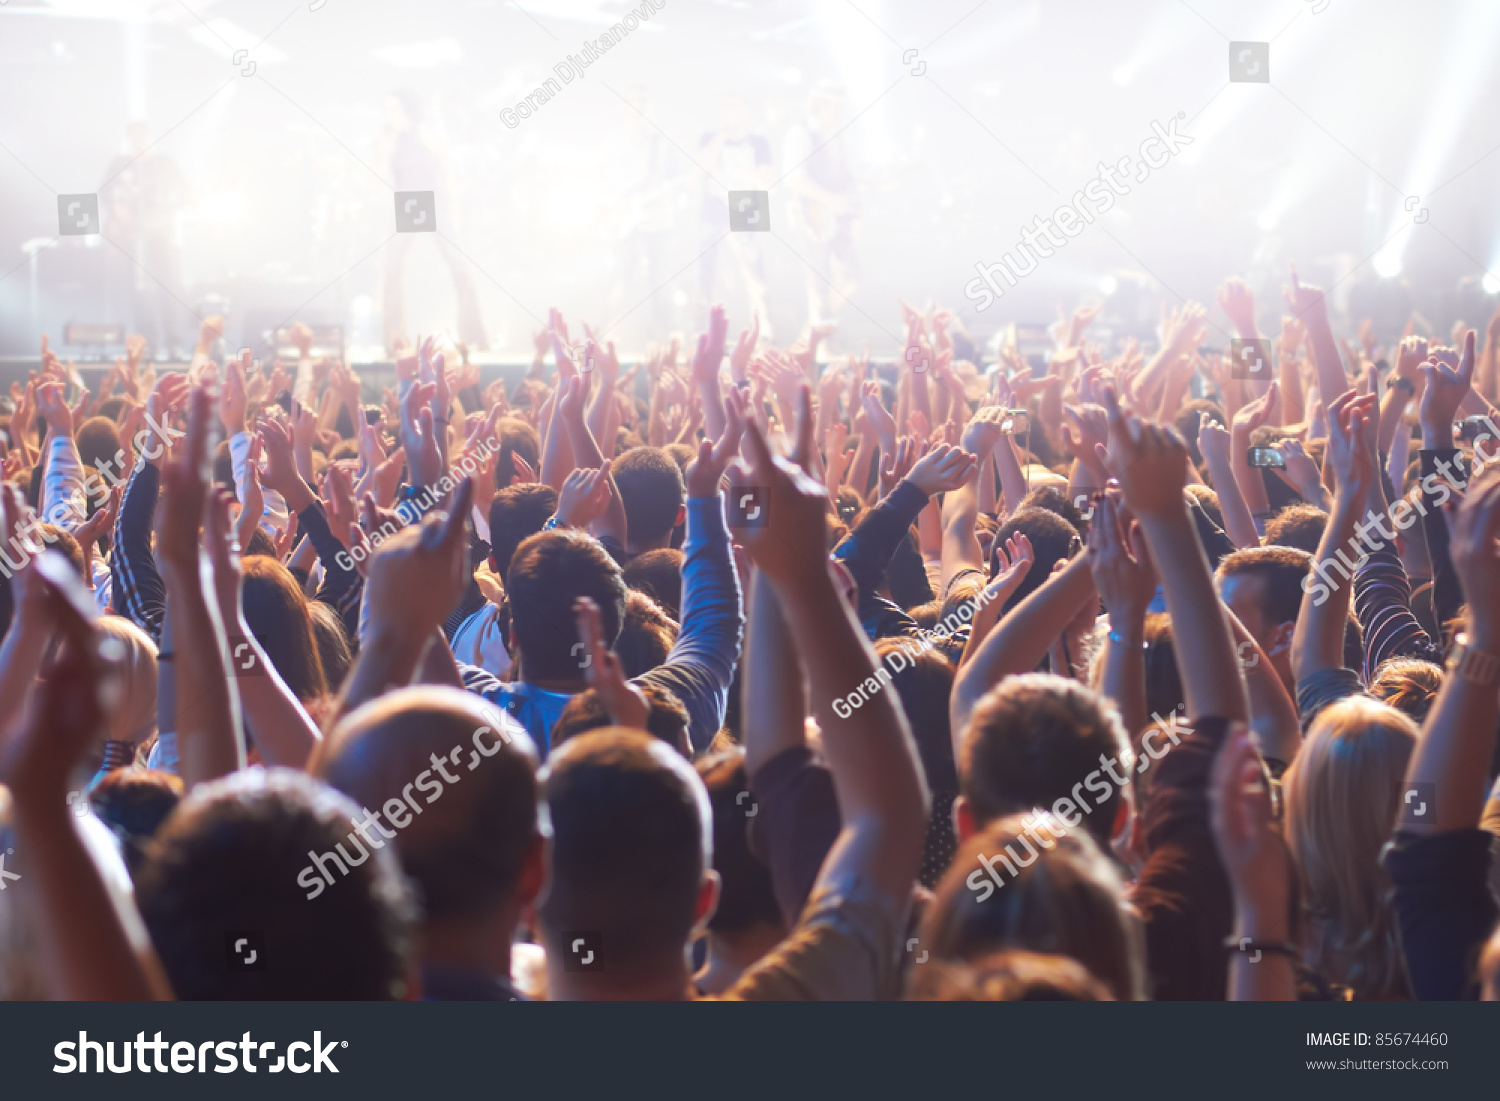 Crowd At A Concert With Hands Up Stock Photo 85674460 : Shutterstock